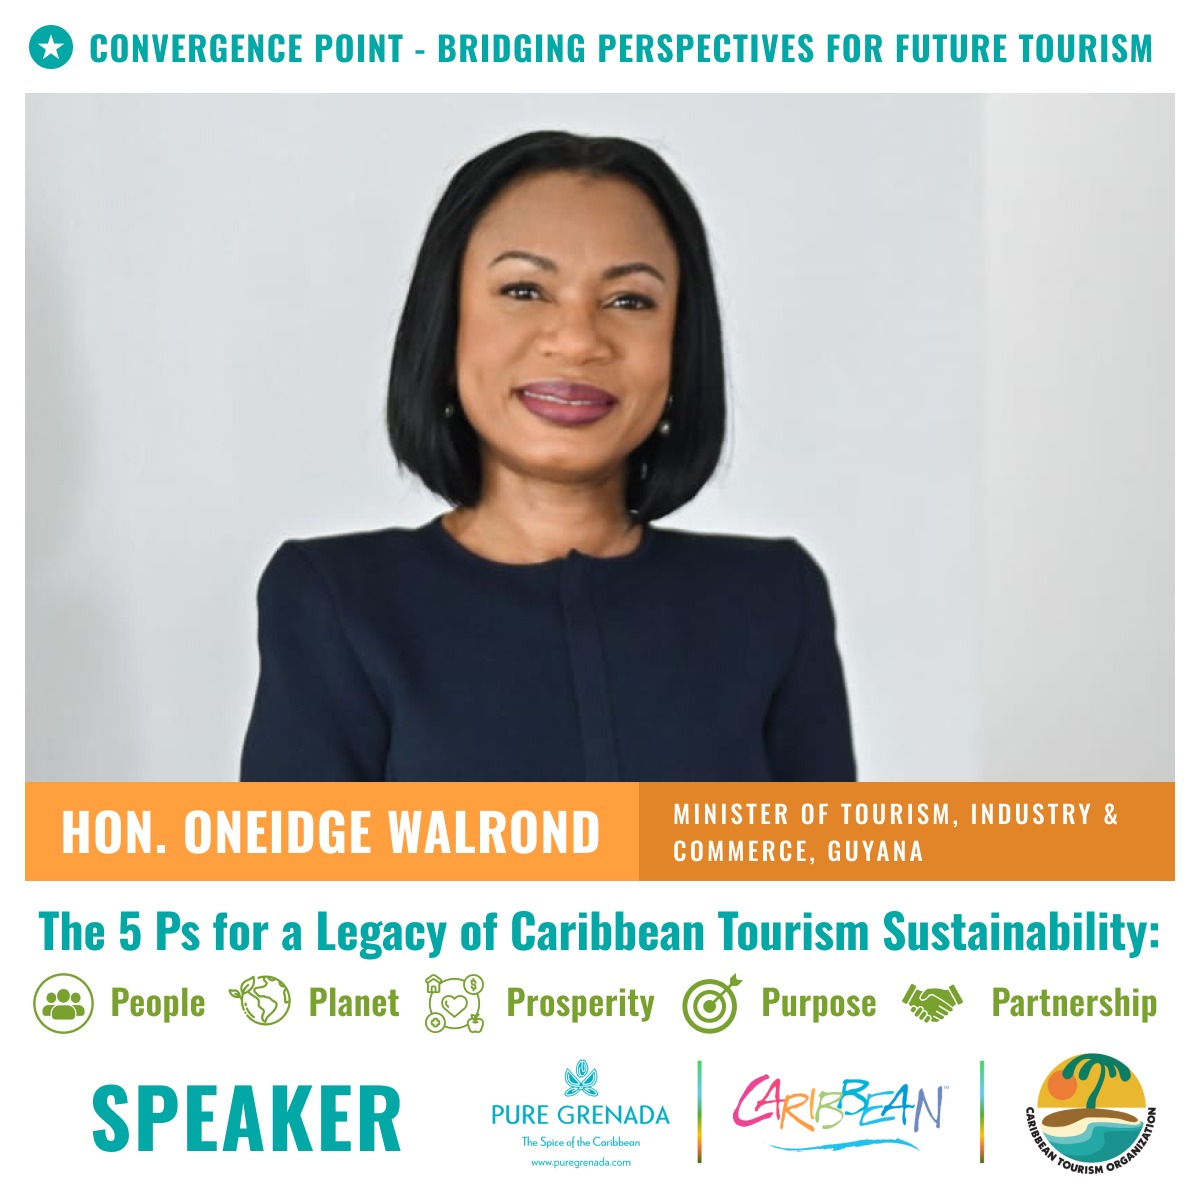 Guyana’s Minister of Tourism, Industry and Commerce, Oneidge Walrond, will join #STC2024 on Tuesday, April 23, for our insightful “Bridging Perspectives for Future Tourism” Convergence Point session. caribbeanstc.com/session/conver… @discoverguyana